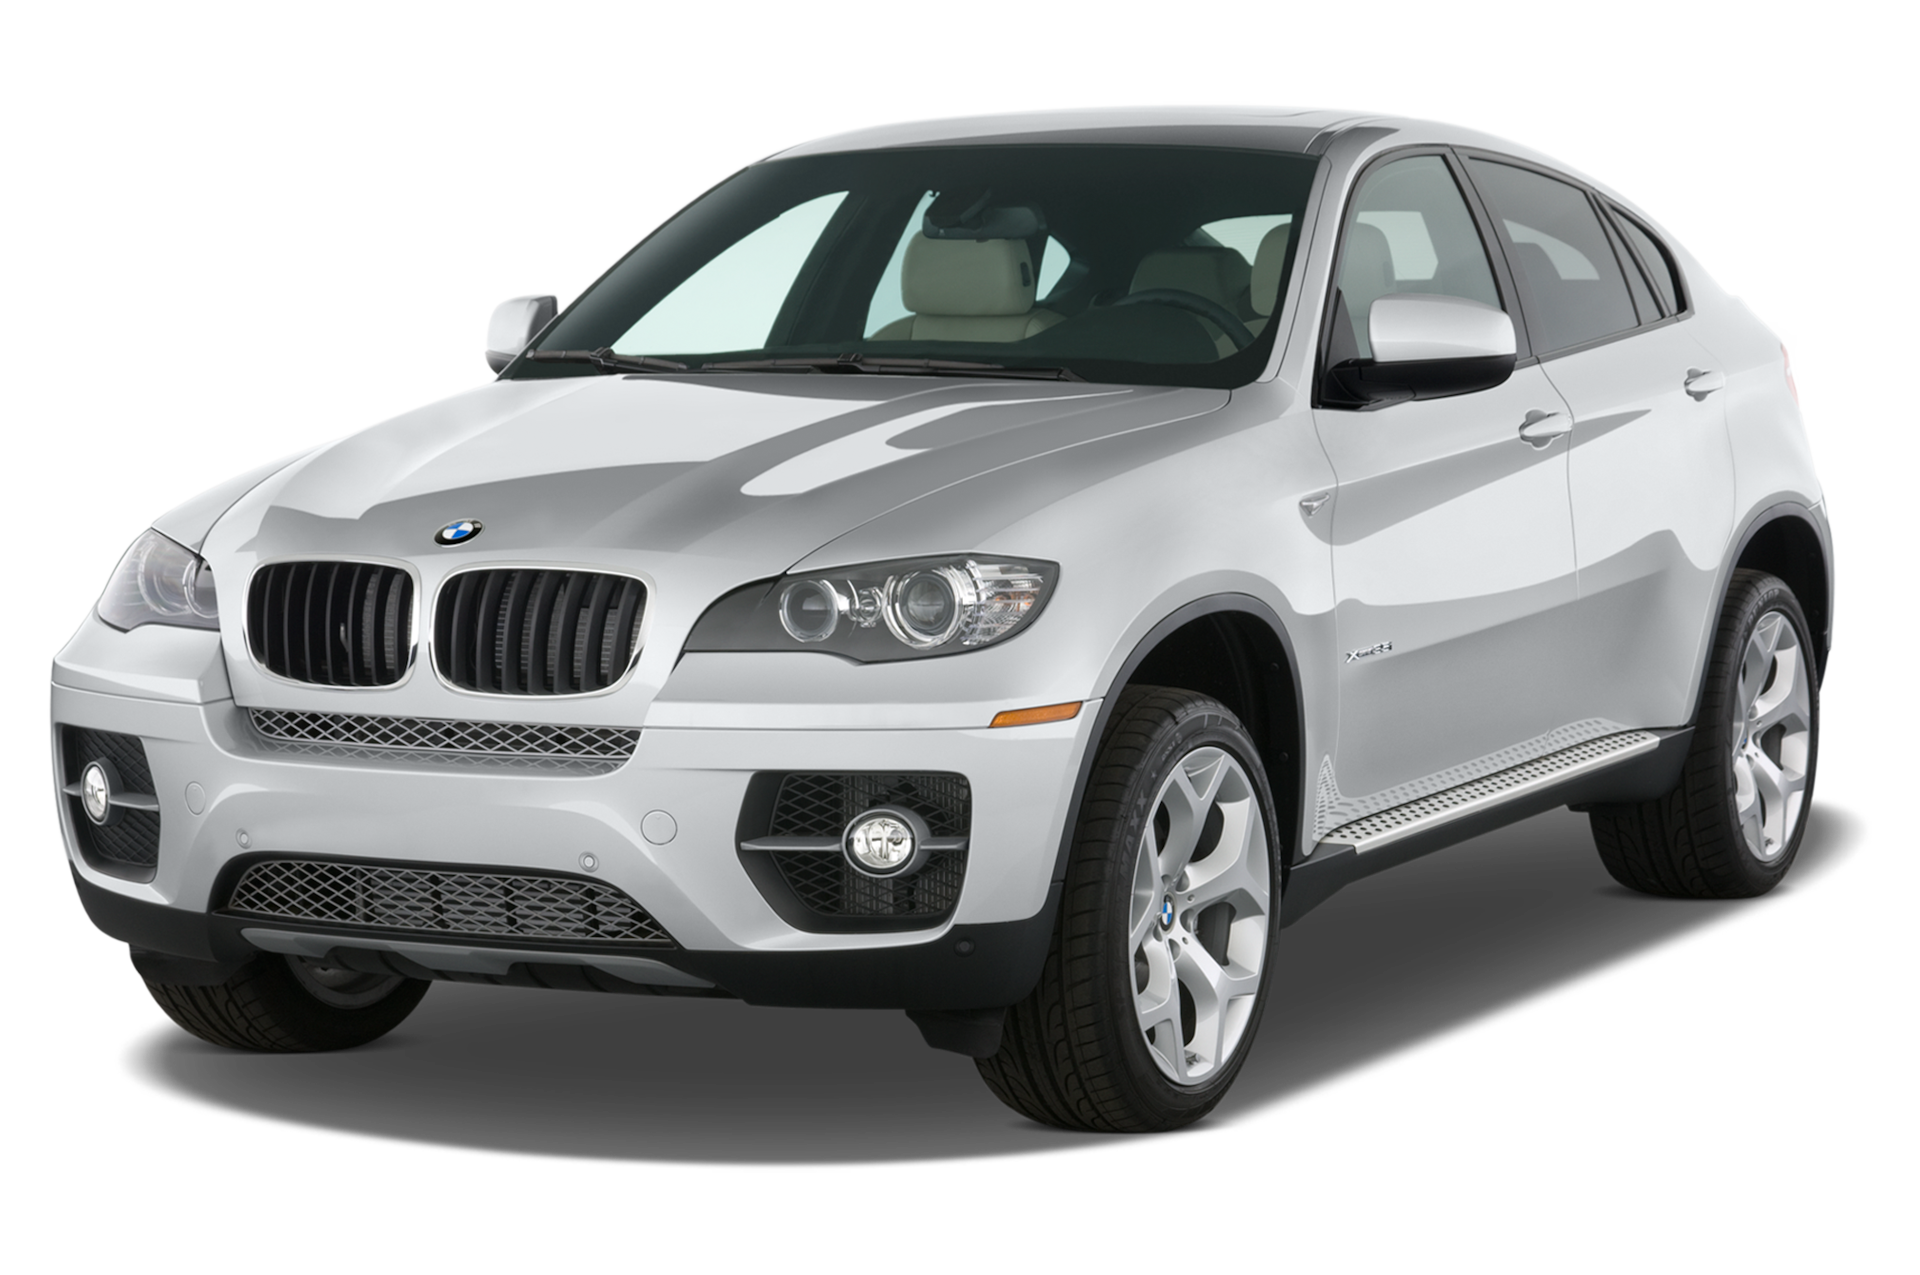 2011 BMW X6 Prices, Reviews, and Photos - MotorTrend